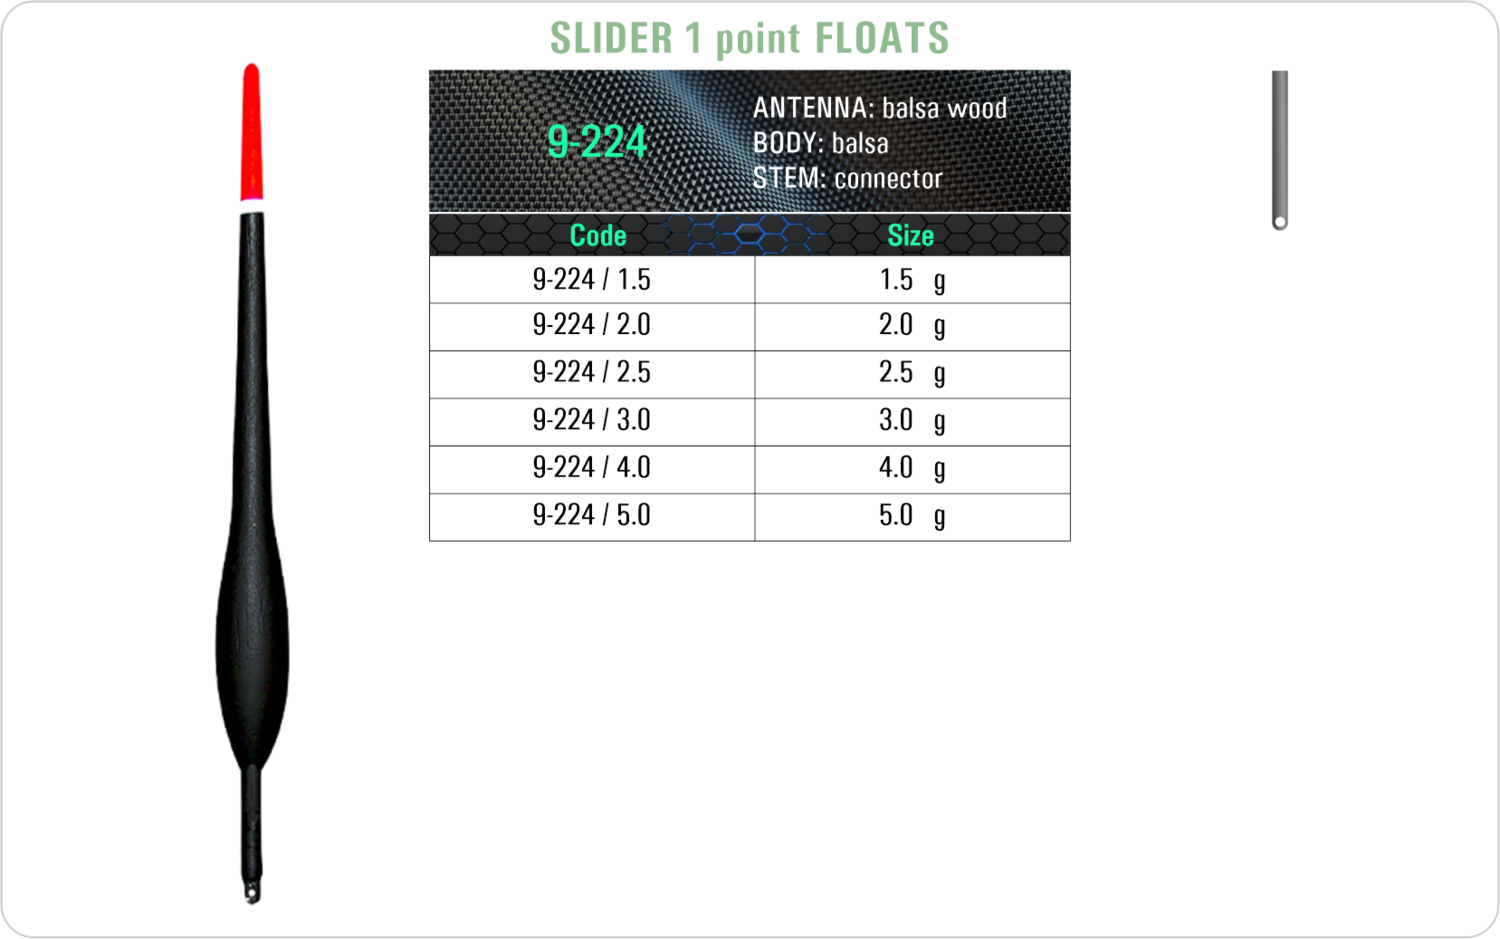 SF 9-224 - Lake and river float model and table containing an additional information about this float with different codes, sizes, types of the body, the stem and the antenna of the float.